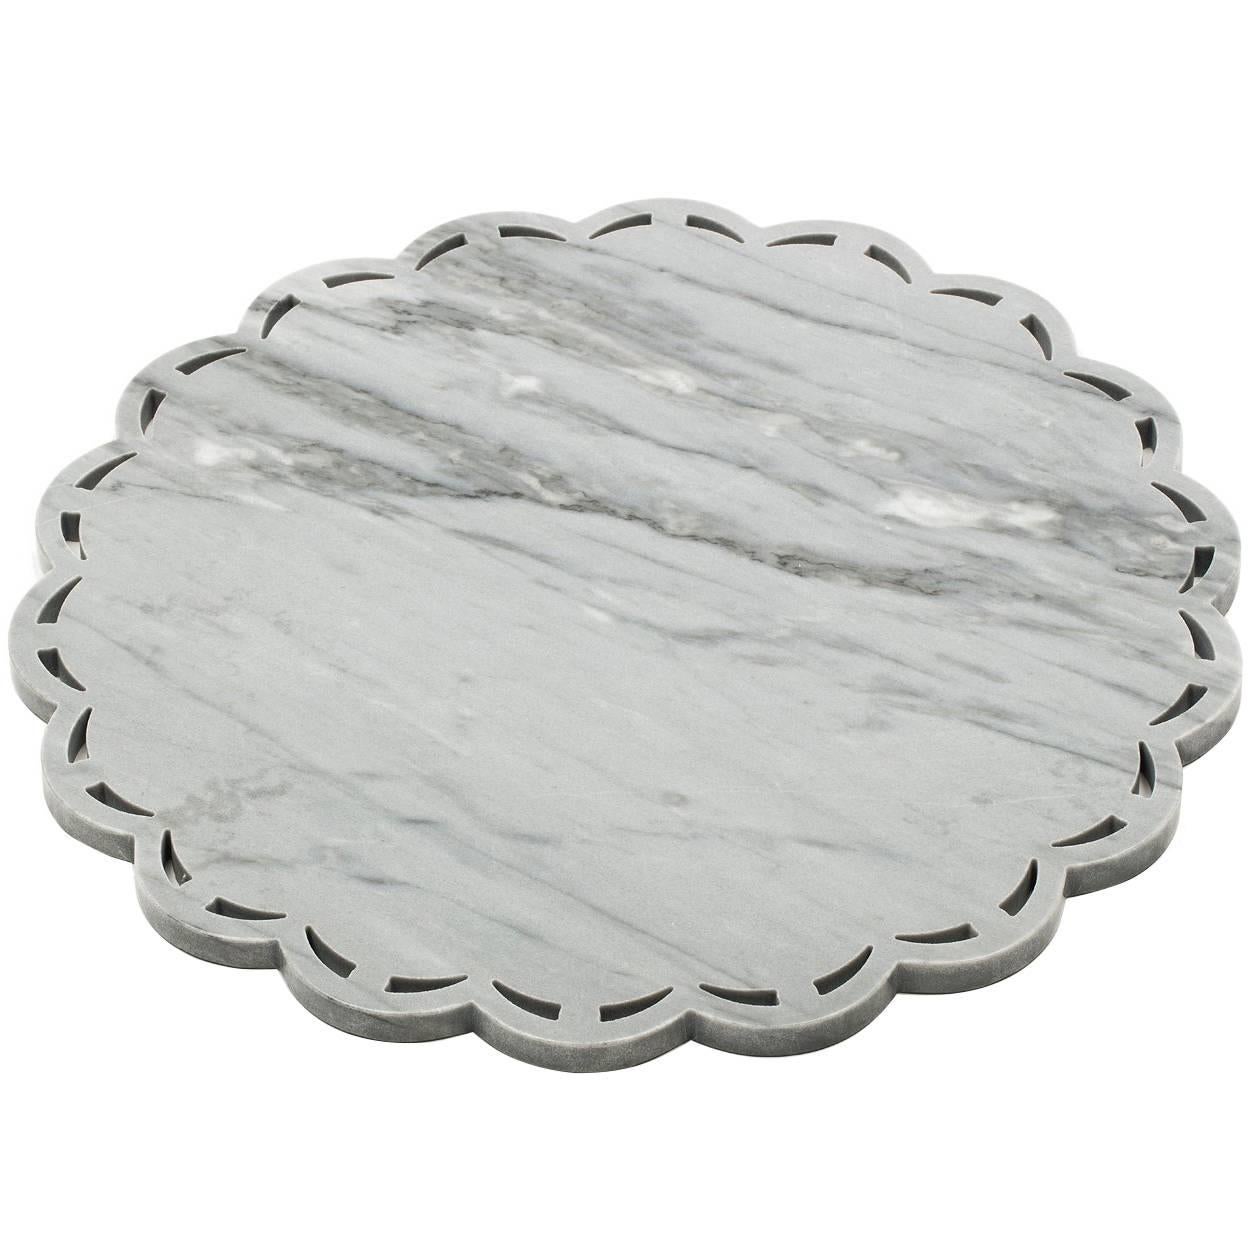 Round Marble Tray or Plate with Lace Edge